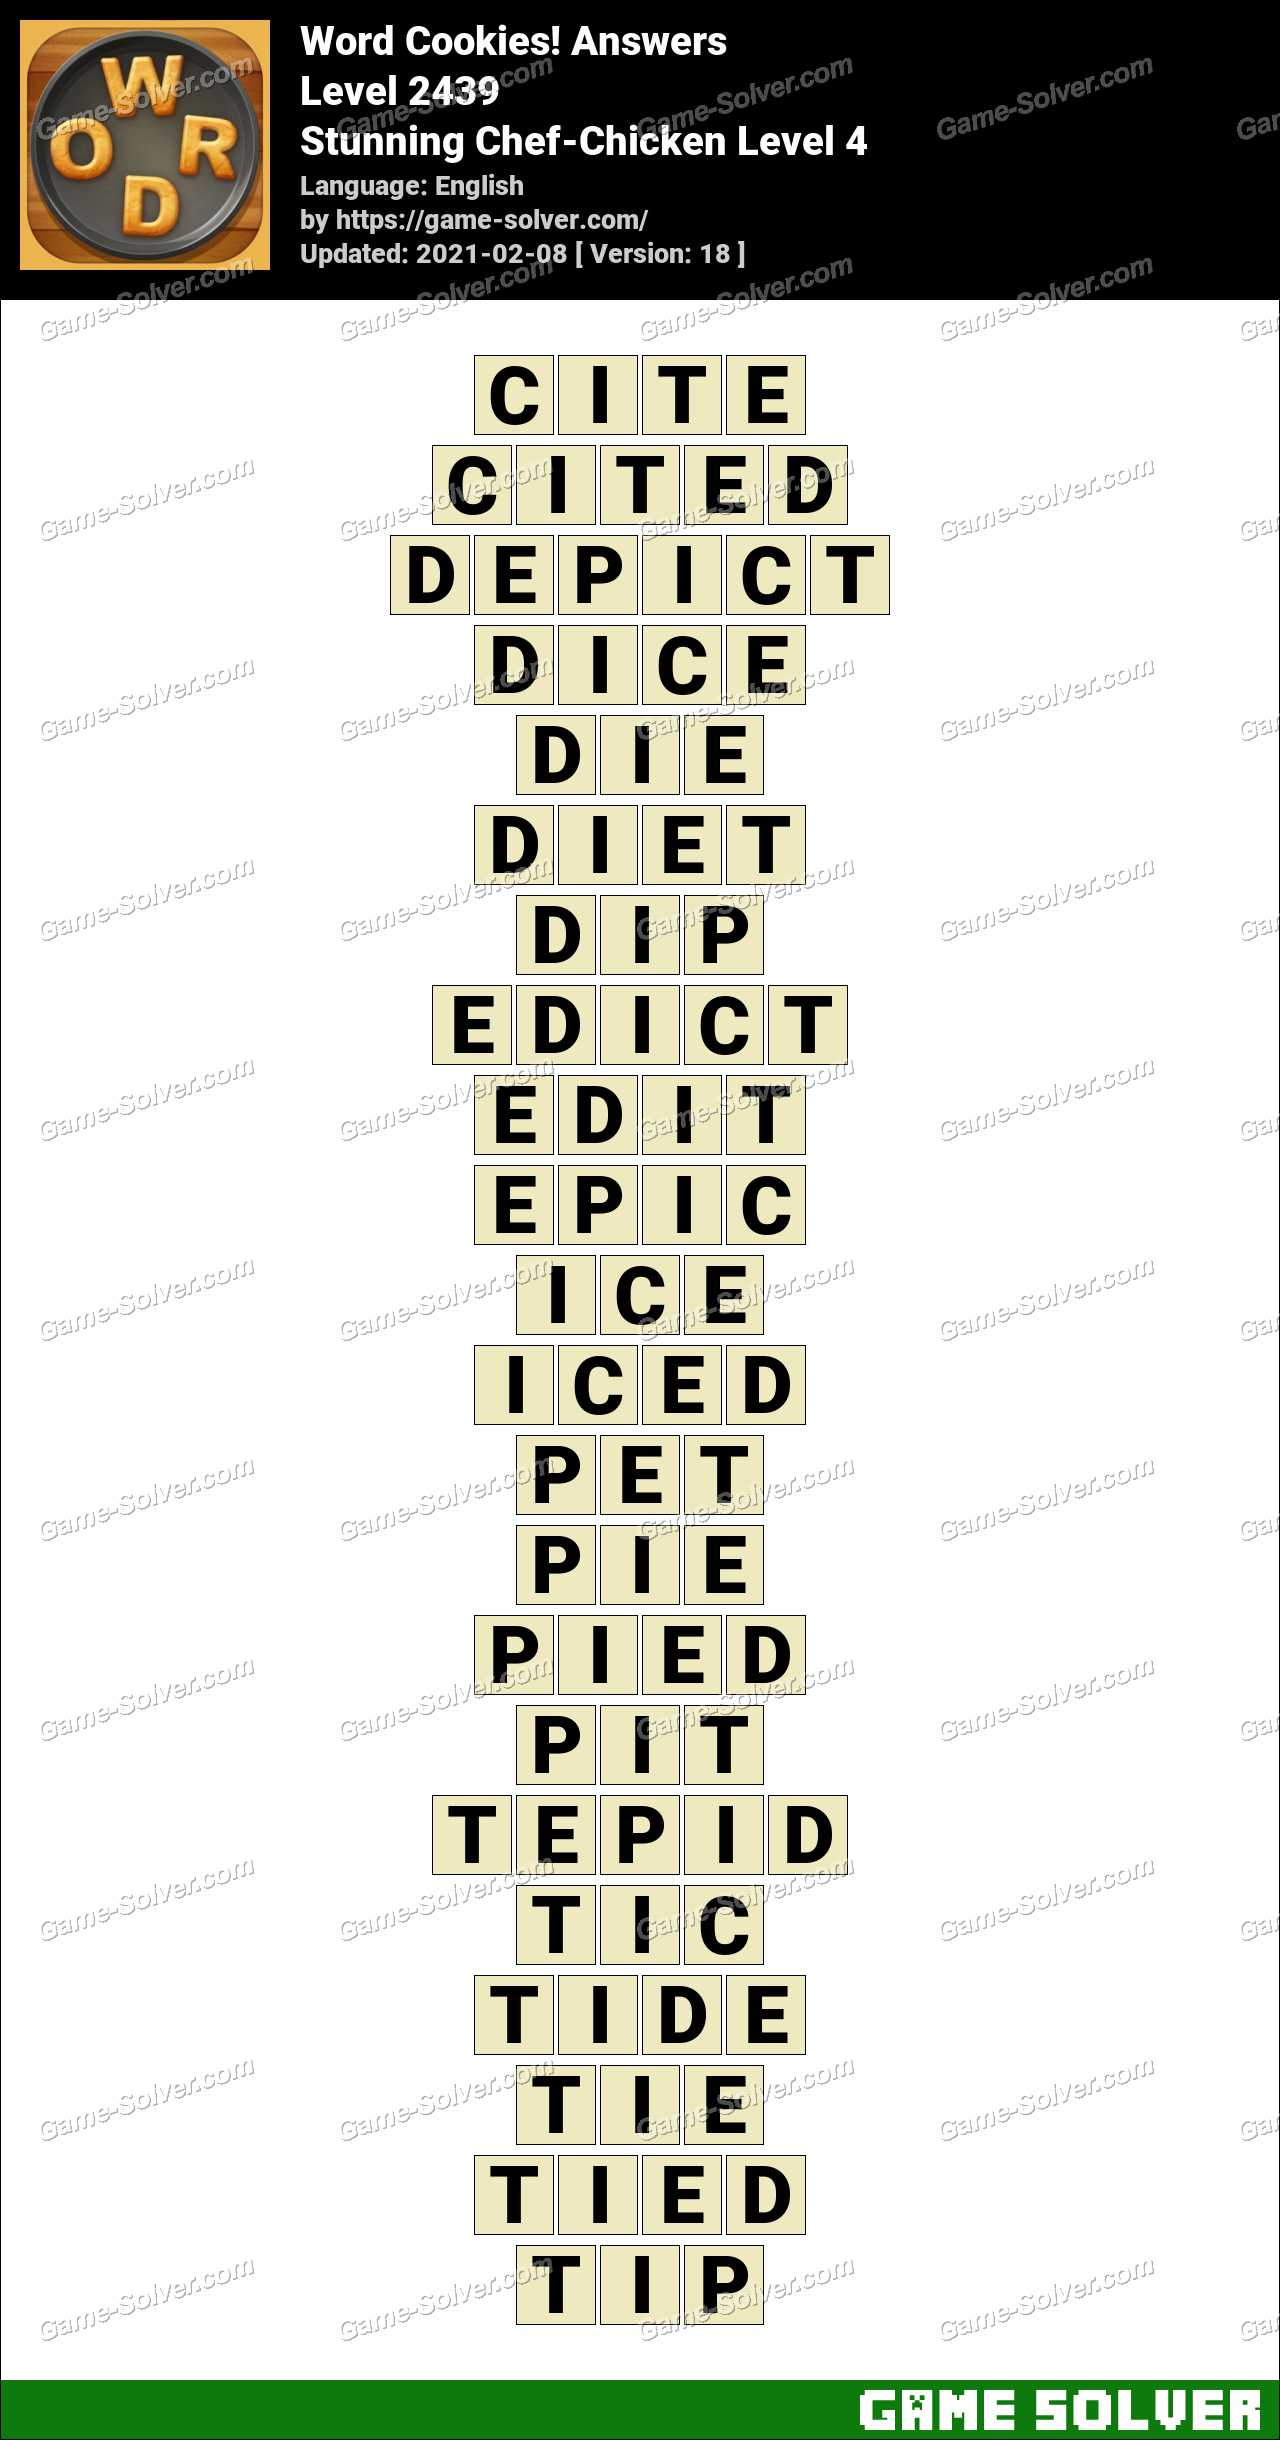 Word Cookies Stunning Chef-Chicken Level 4 Answers • Game Solver